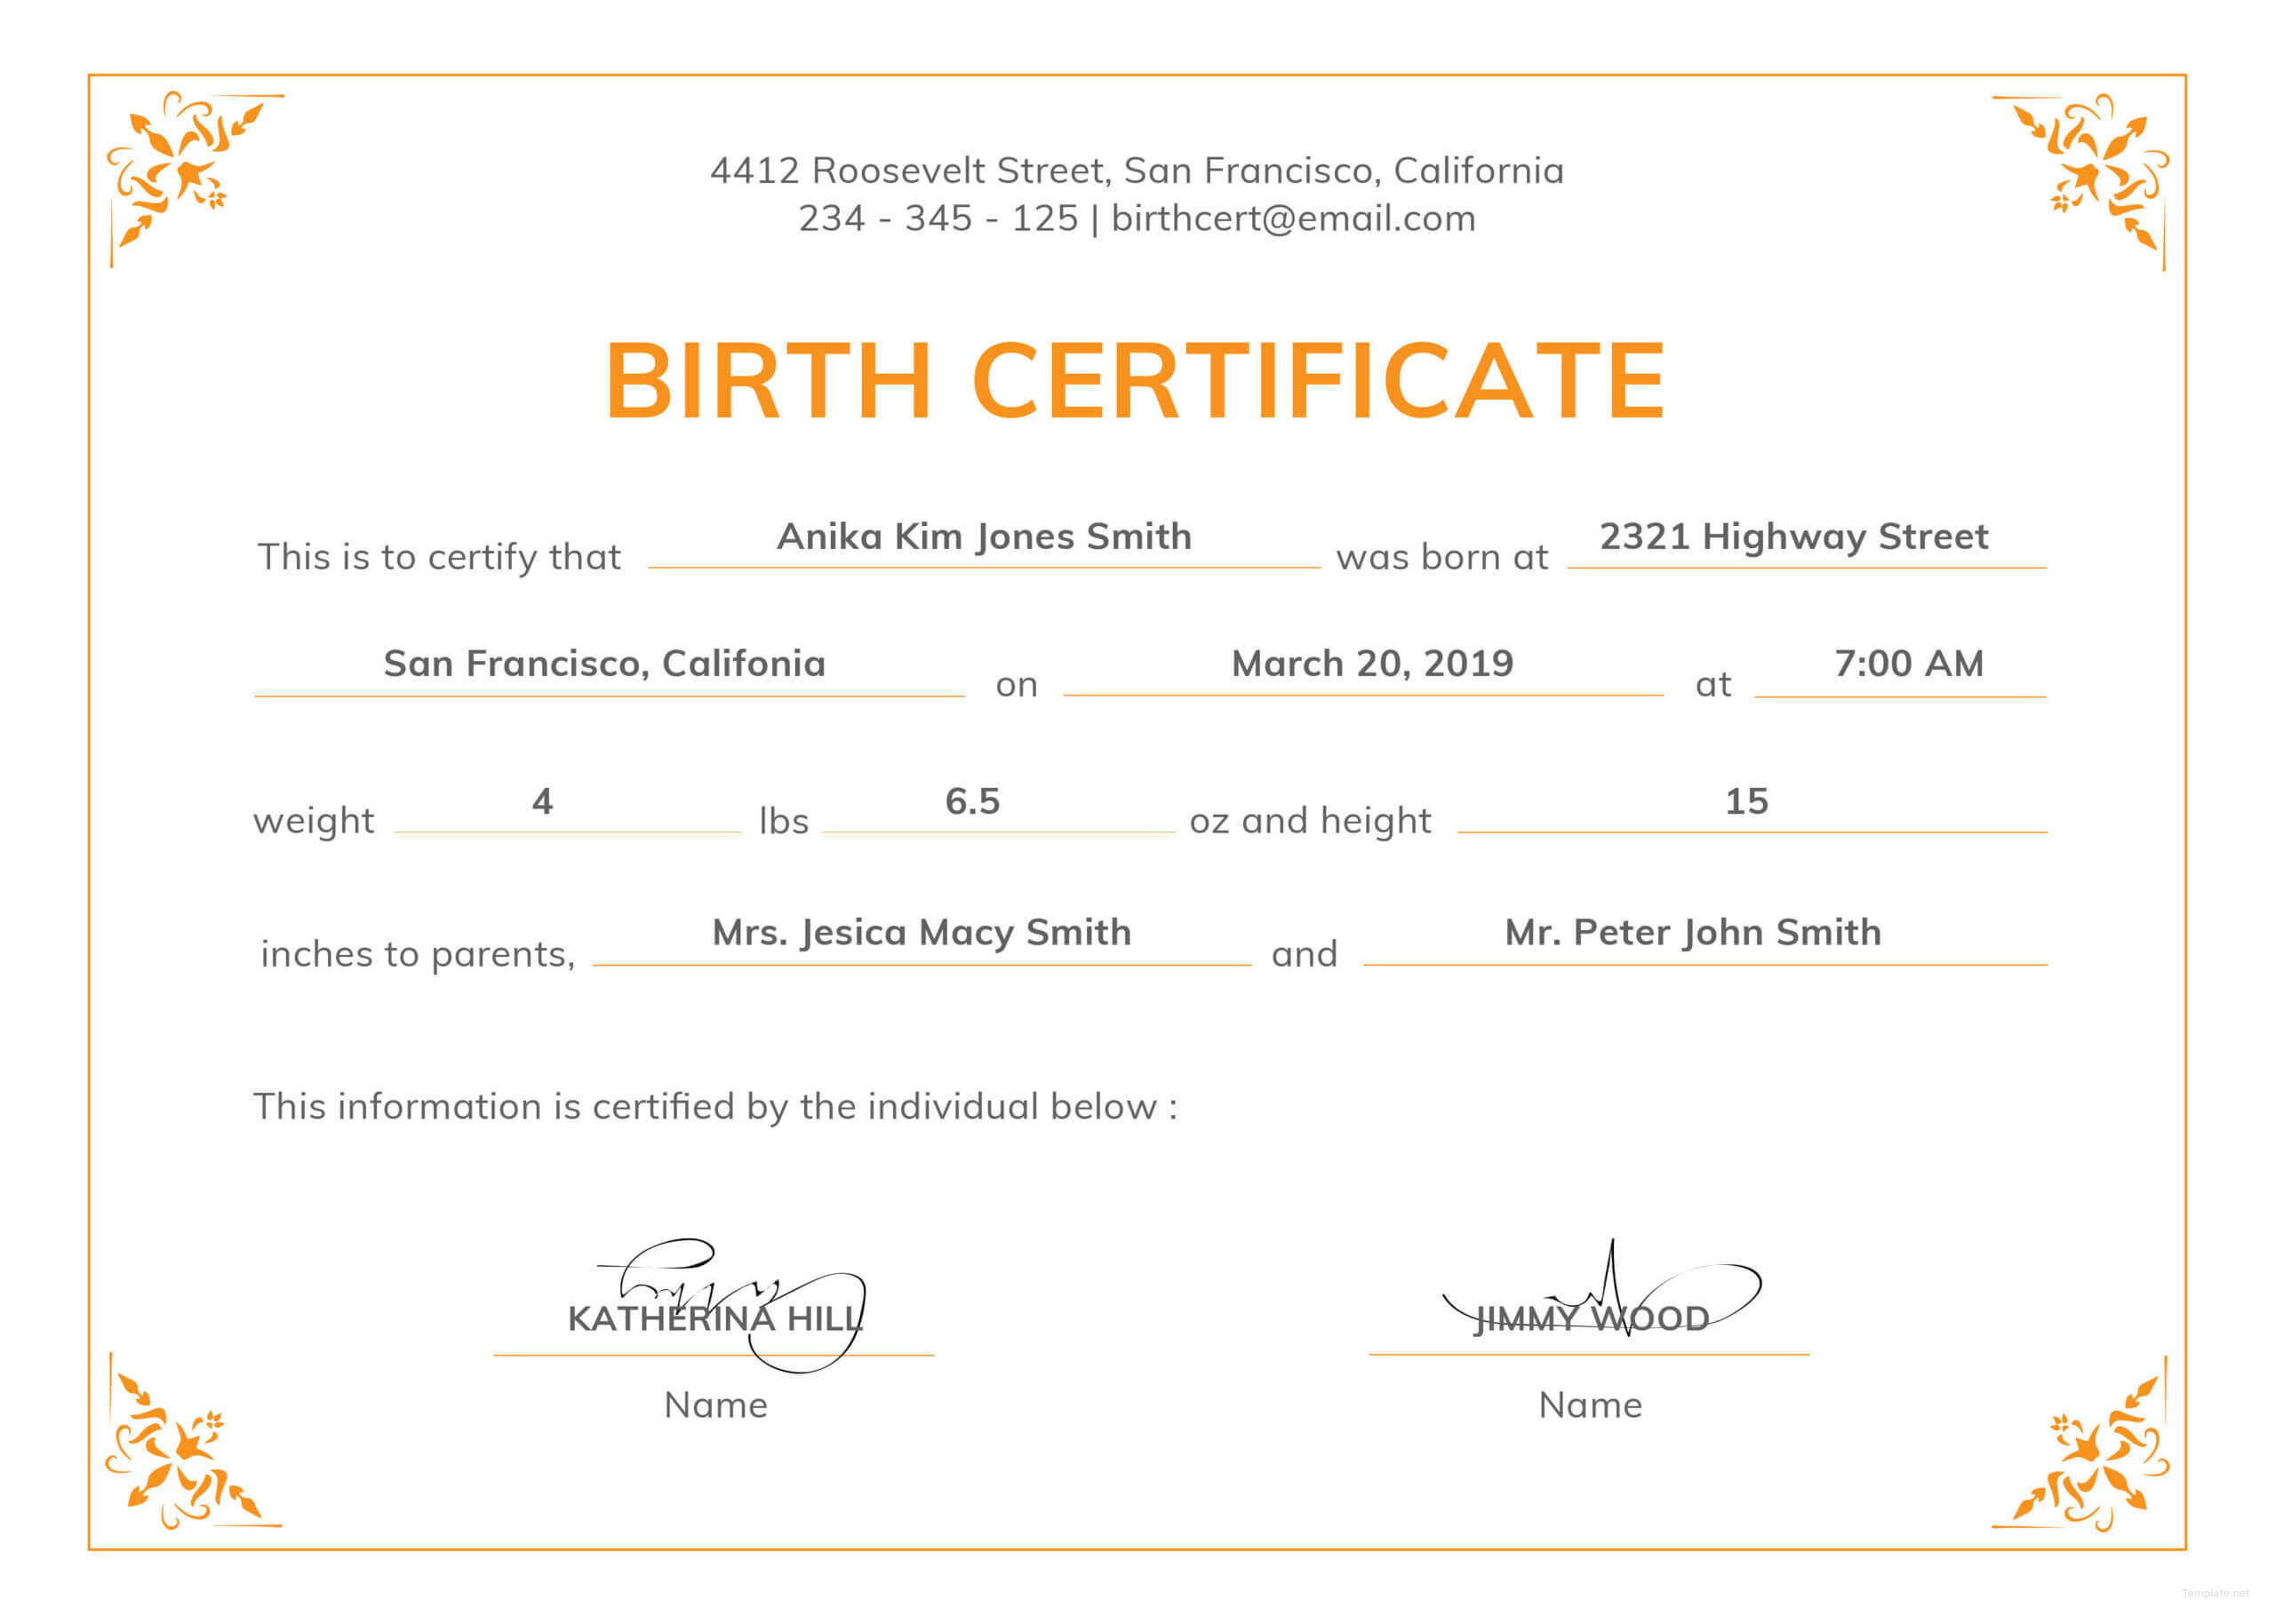 Can Make A Delivery Certificate Crucial | Gift Certificate Pertaining To Birth Certificate Template Uk